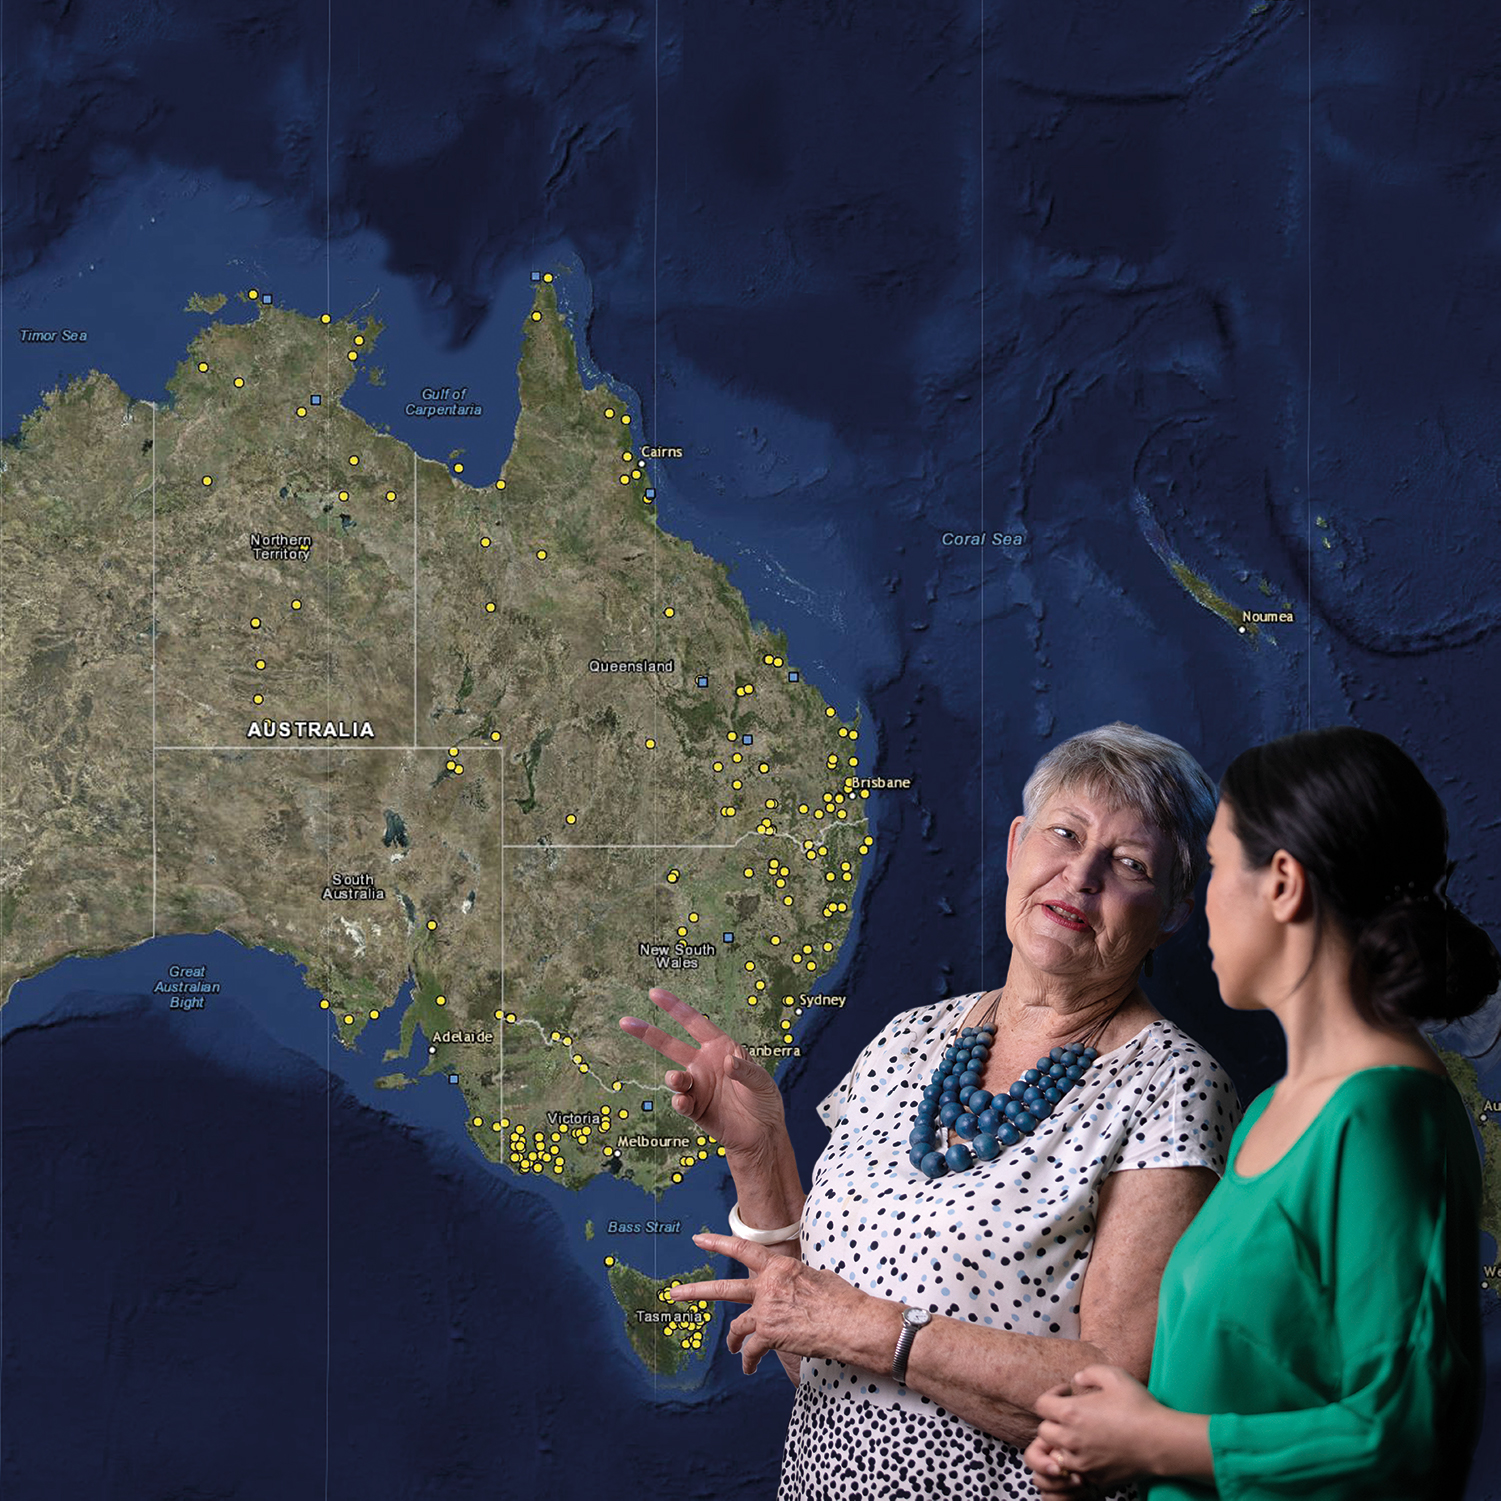 Professor Lyndall Ryan with the map of Australia showing the colonial massacres